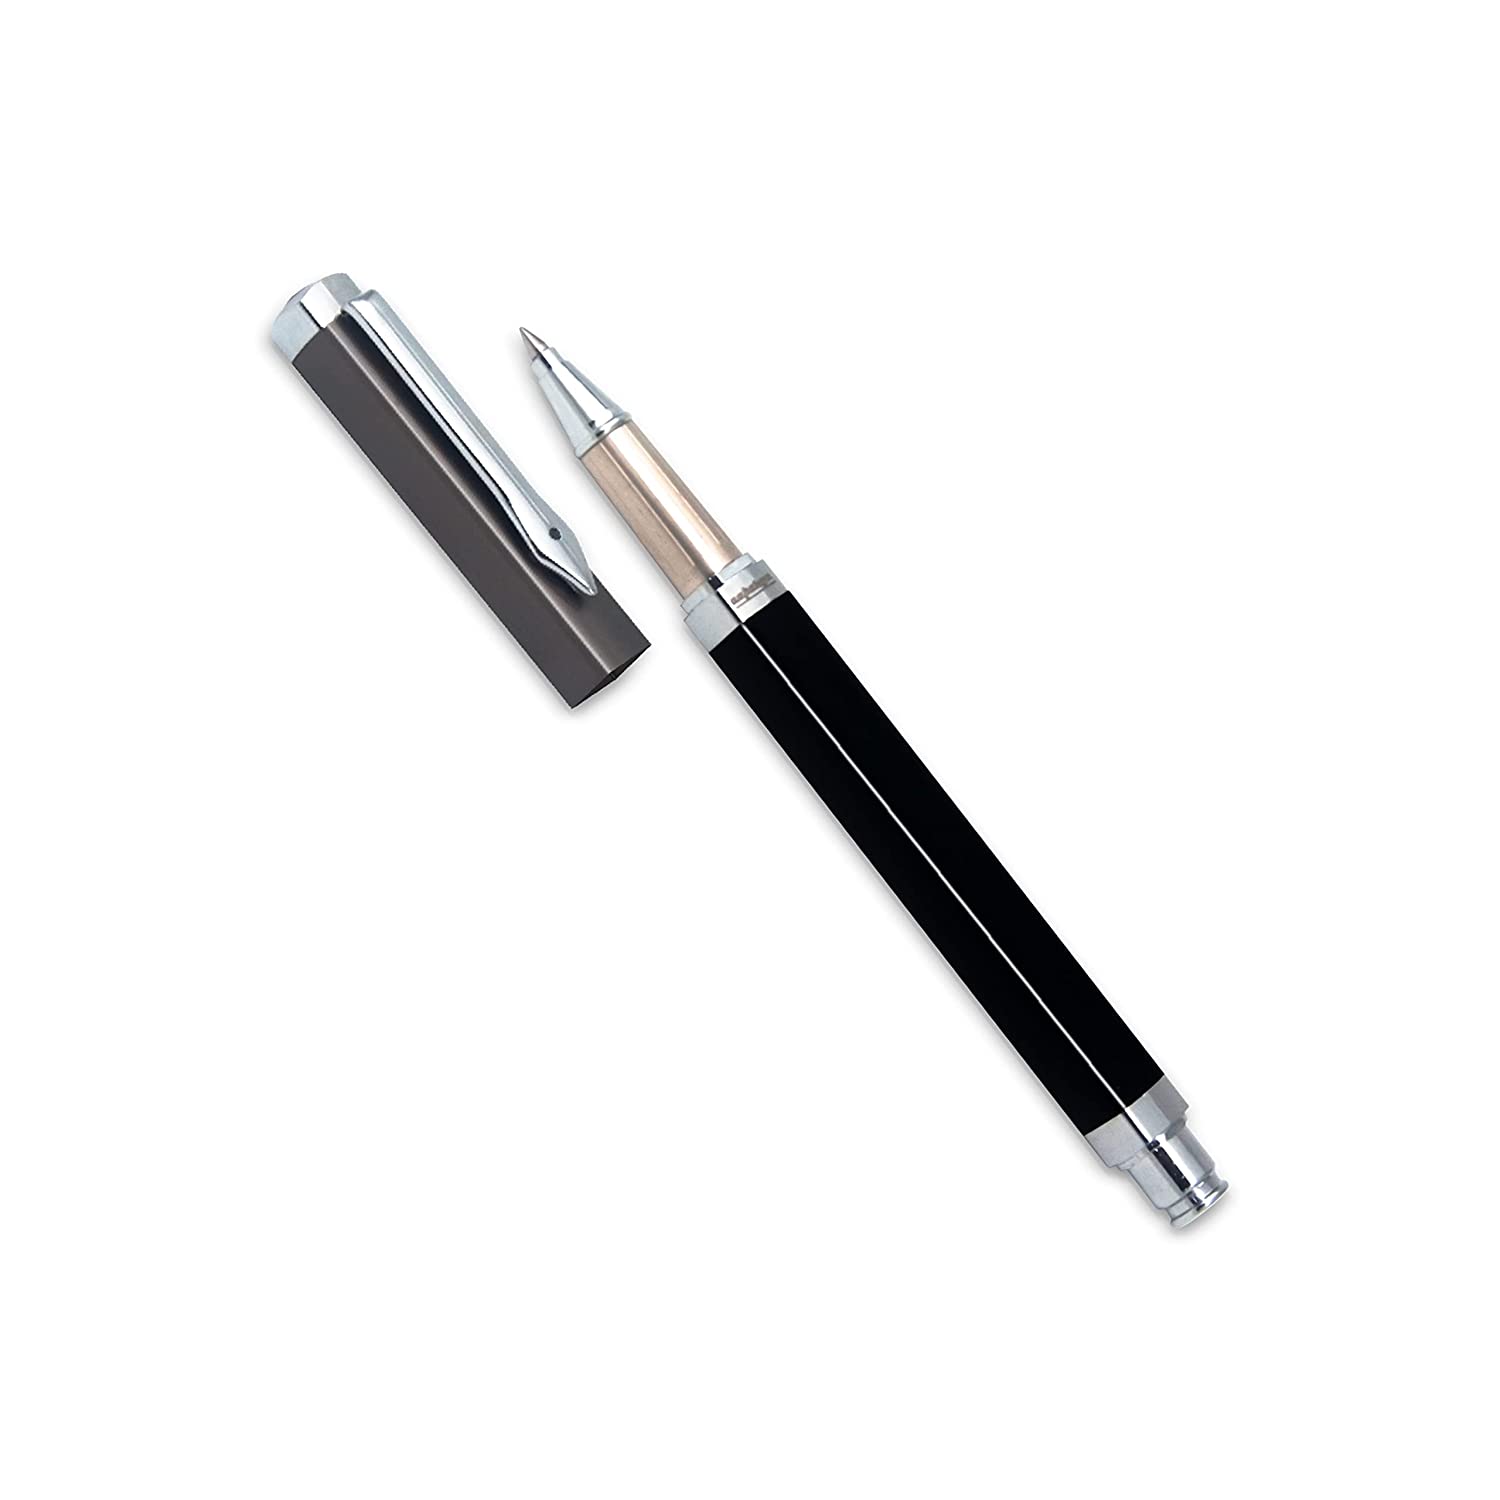 Premium Square Roller Pen, Black Shinning Color Body with Gun Metal Cap & Brass Body, Luxury Pen for gift with Genuine Leather Cover